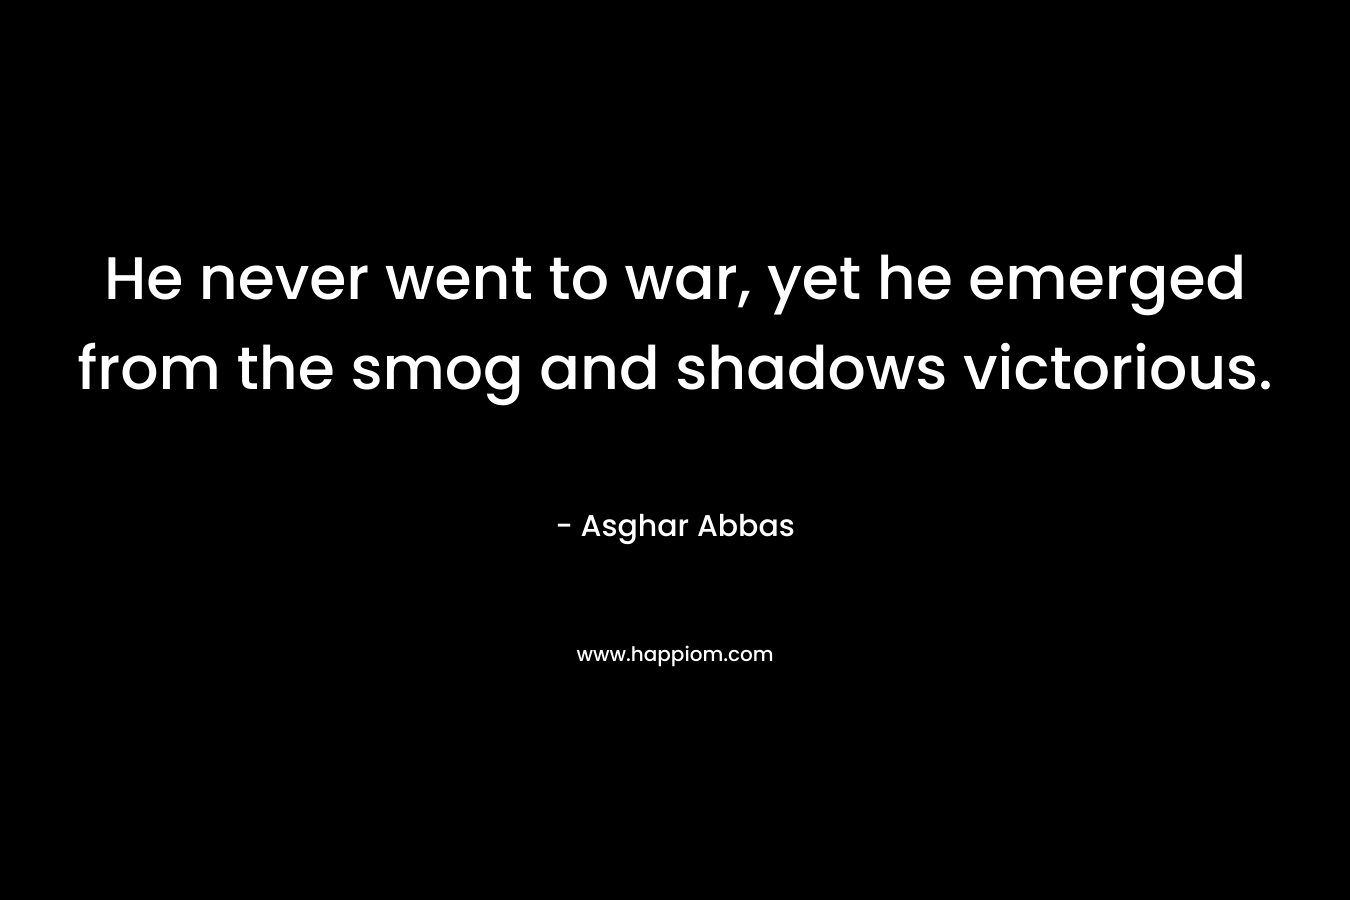 He never went to war, yet he emerged from the smog and shadows victorious. – Asghar Abbas